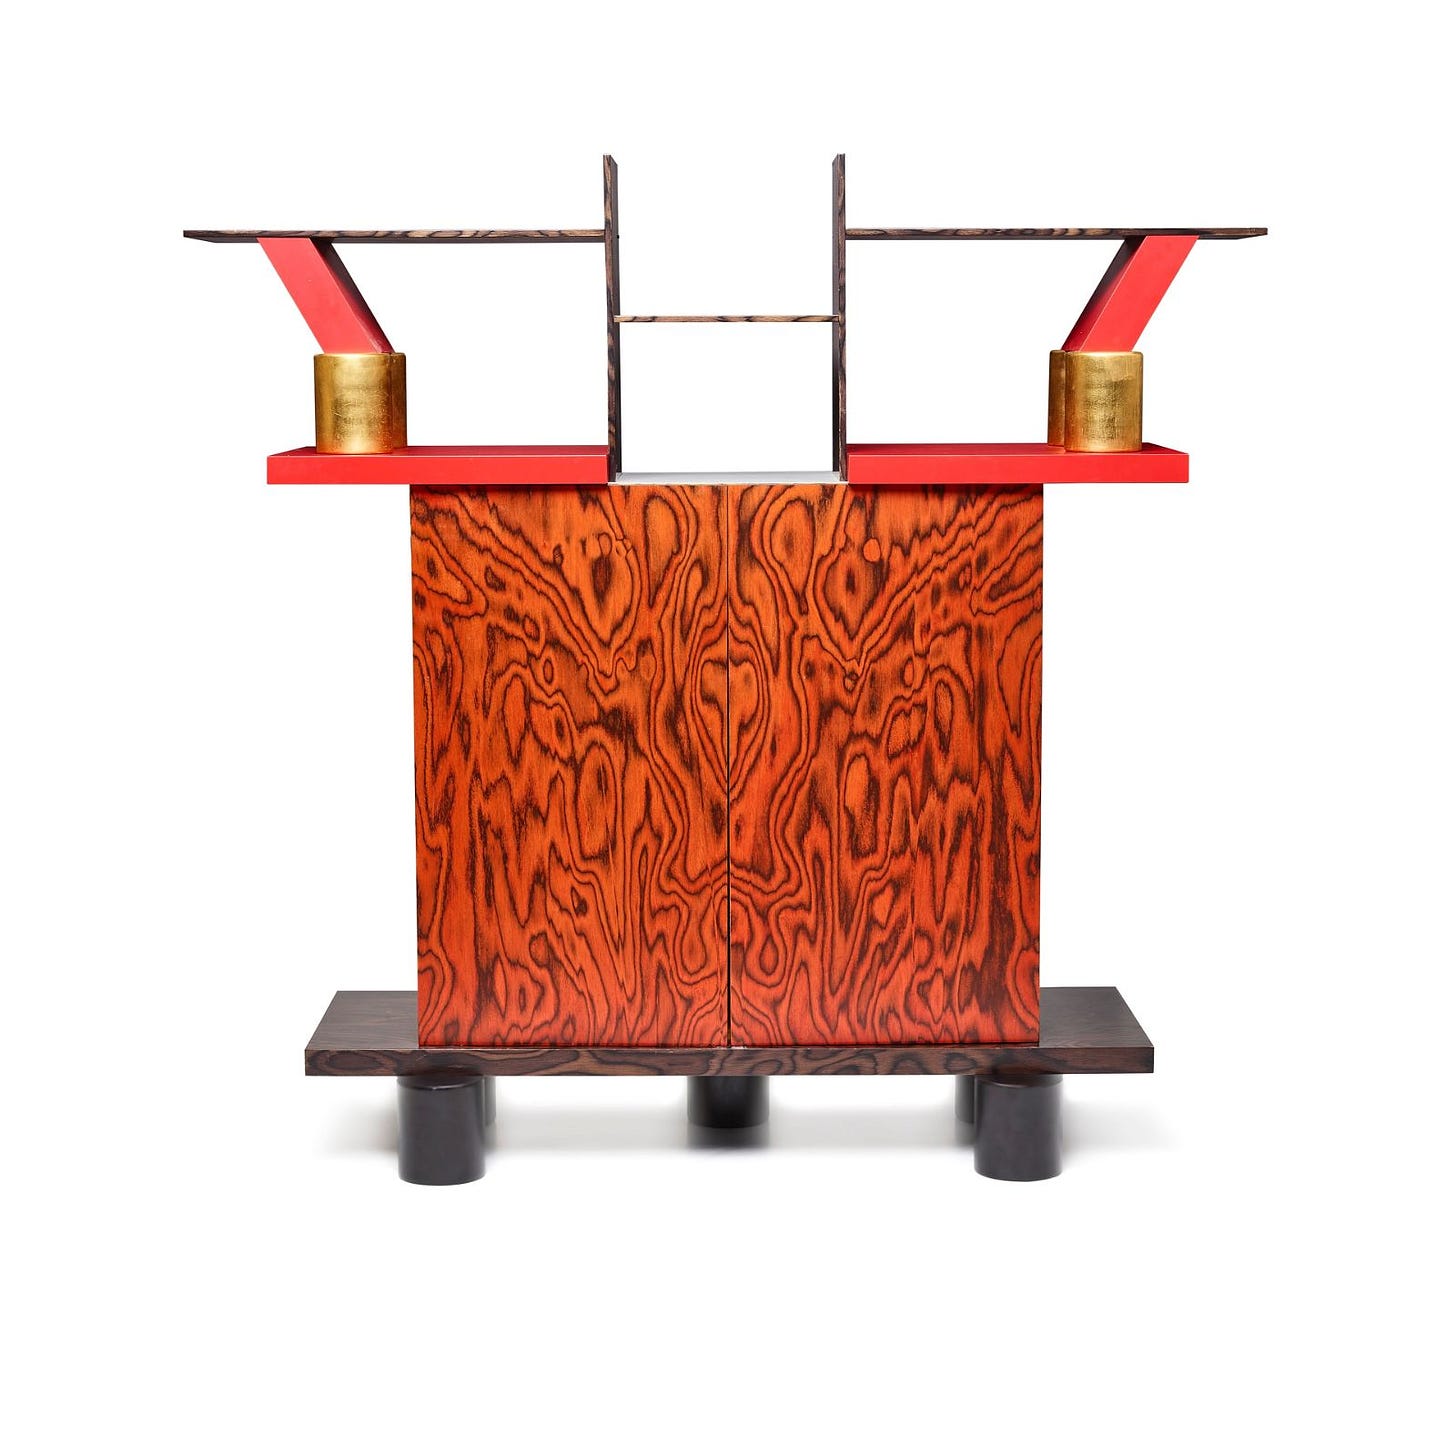 ETTORE SOTTSASS (1917-2007) Freemont Sideboarddesigned 1985for Memphis, reconstituted wood venee...